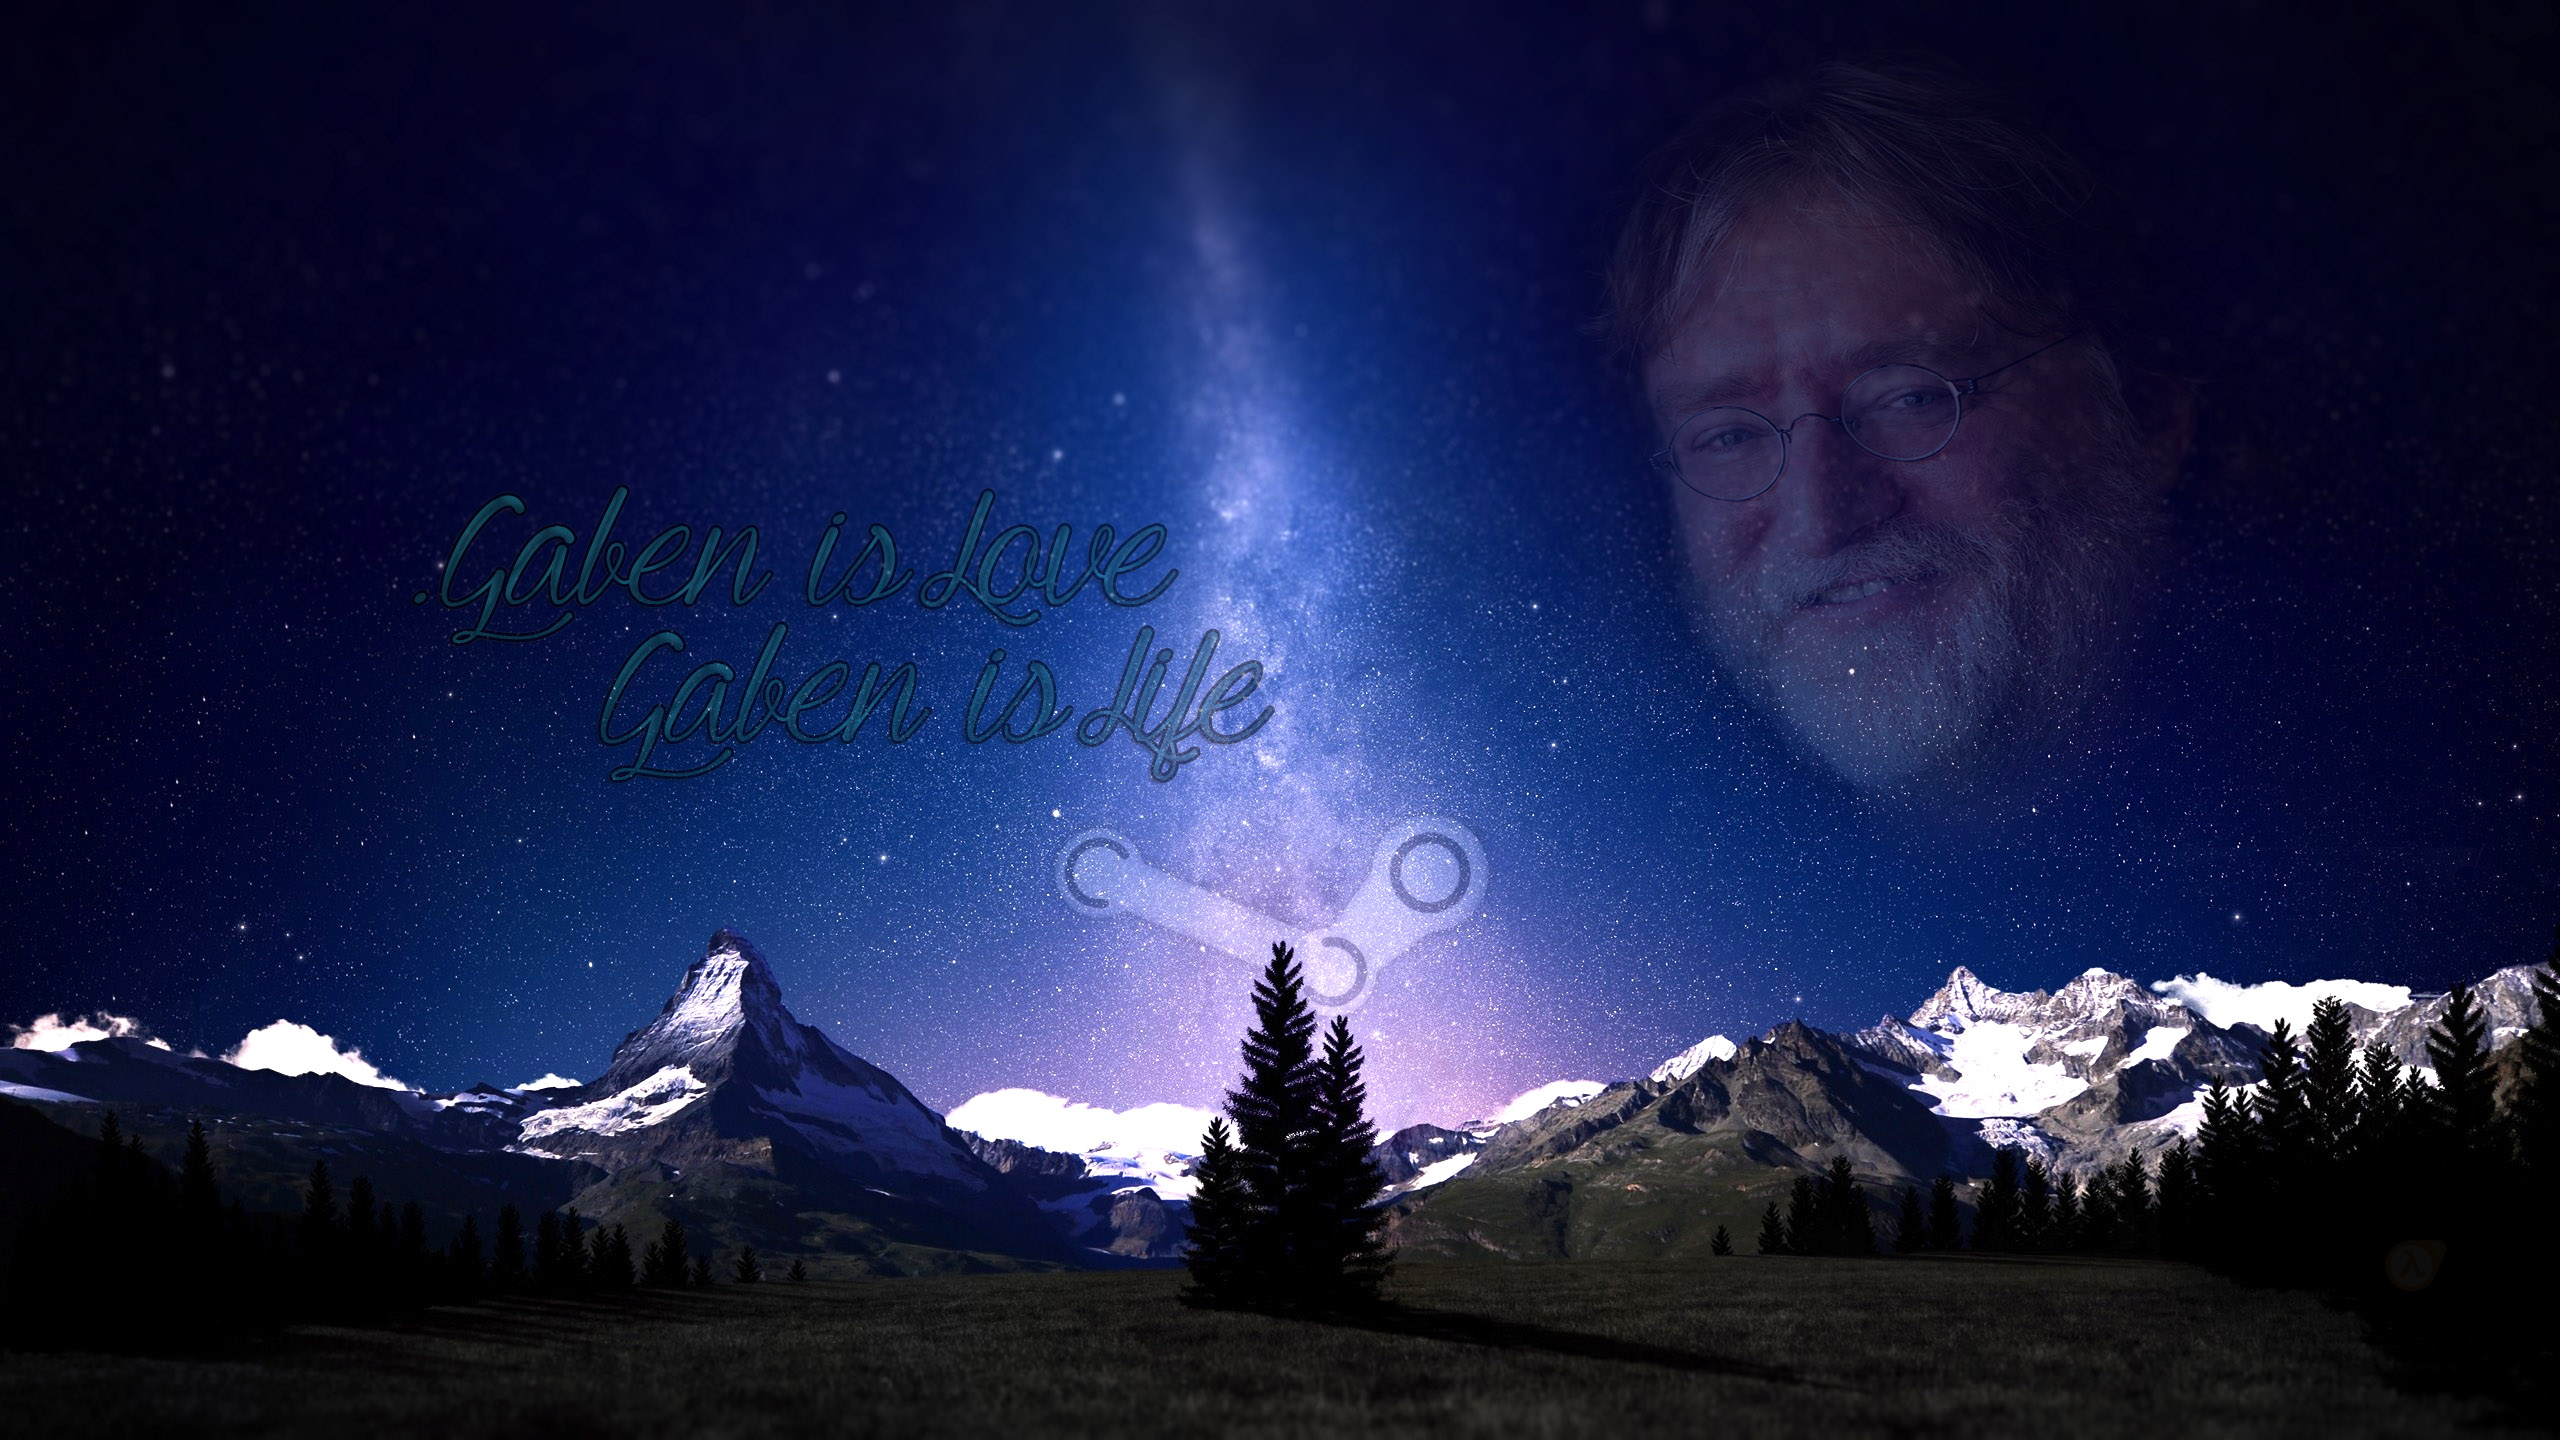 I Created This Wallpaper To Please Our Lord Gaben